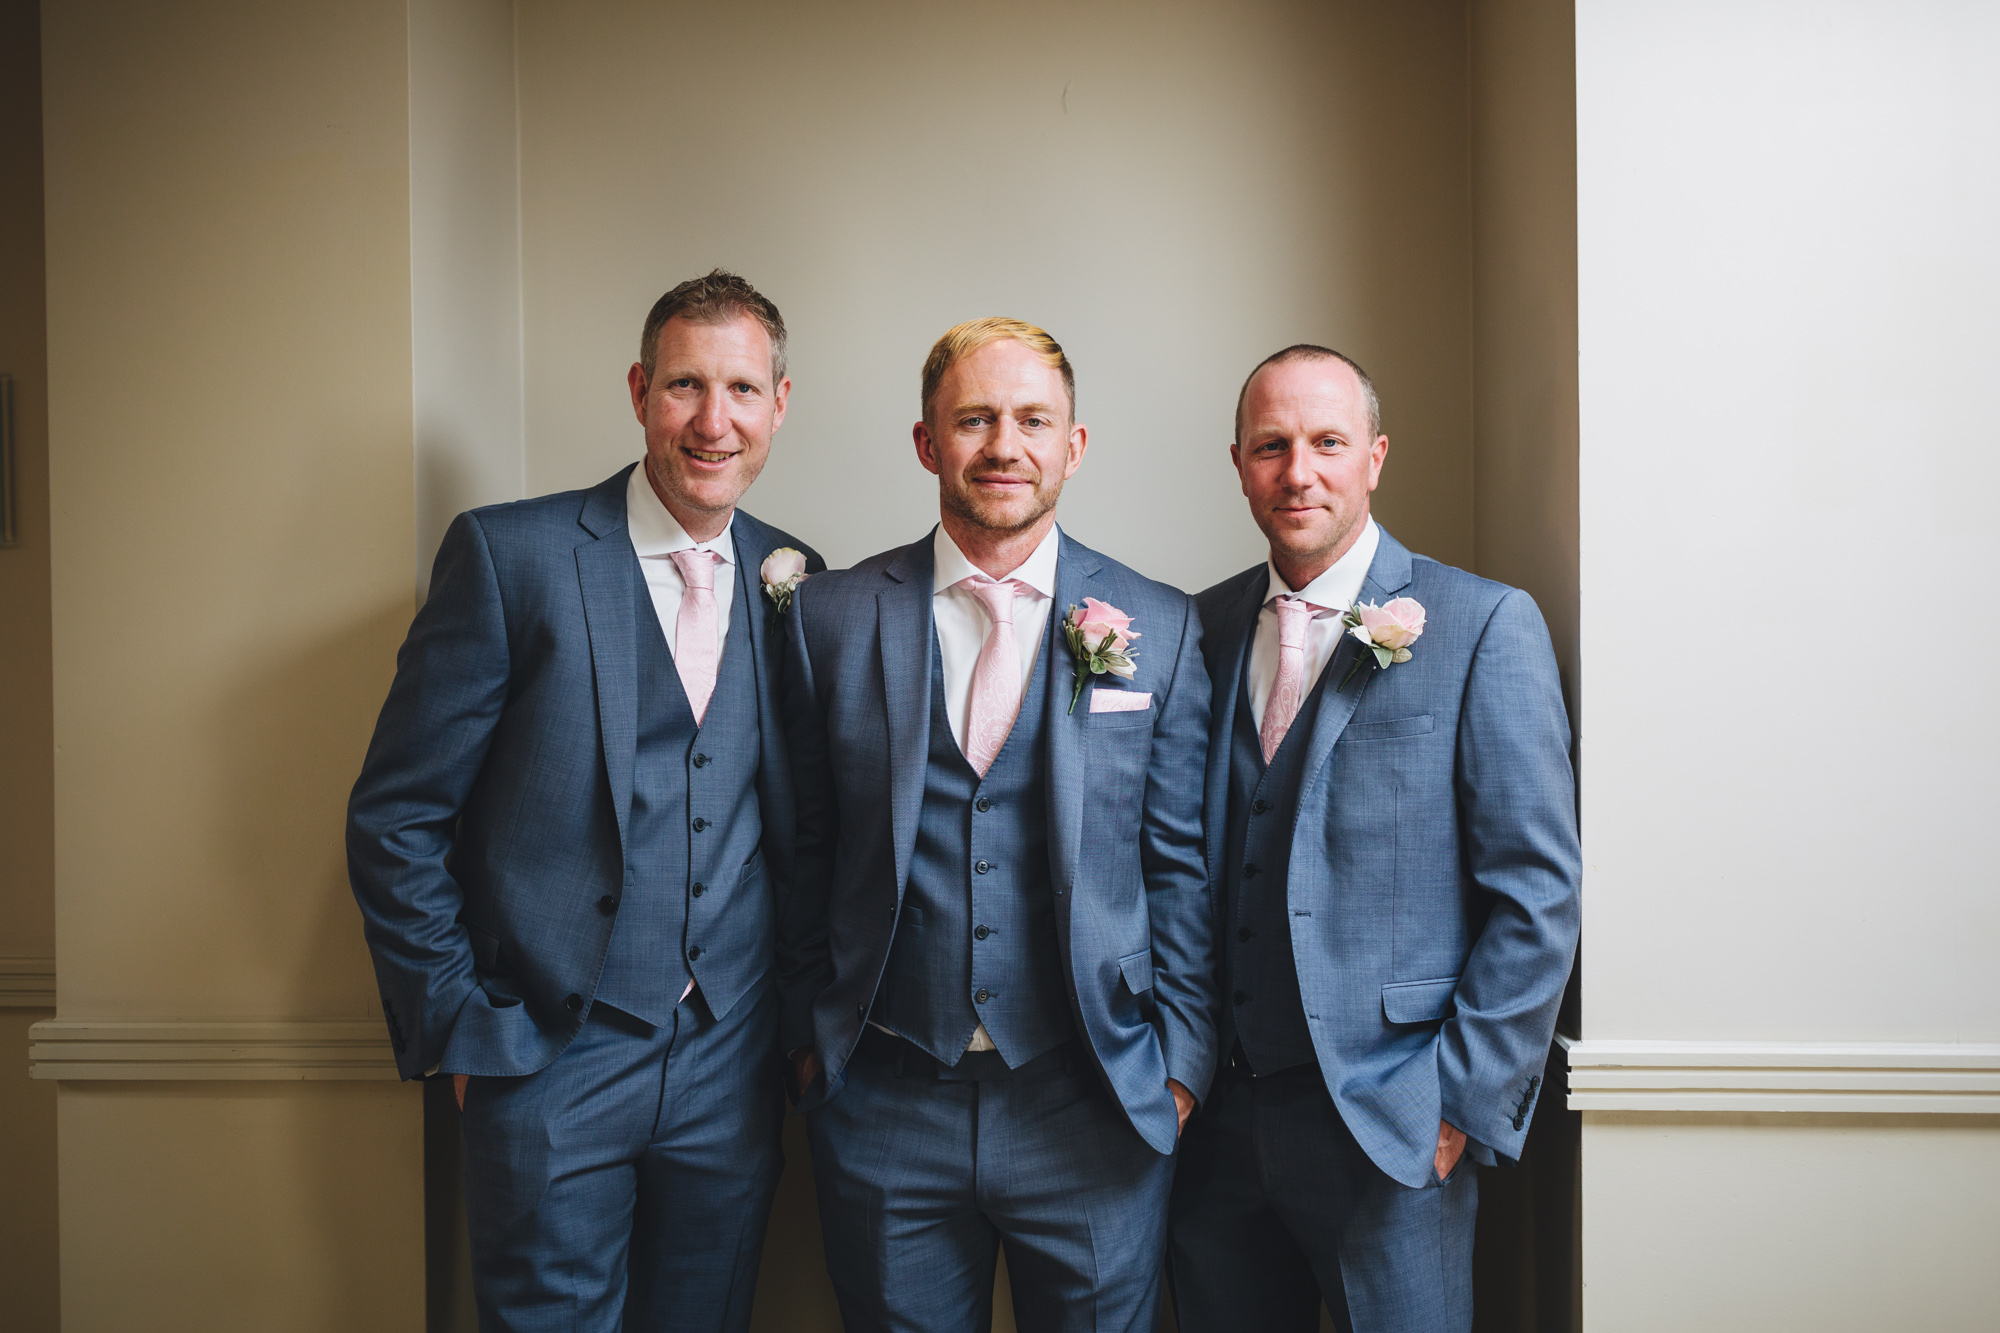 South Wales wedding photographer